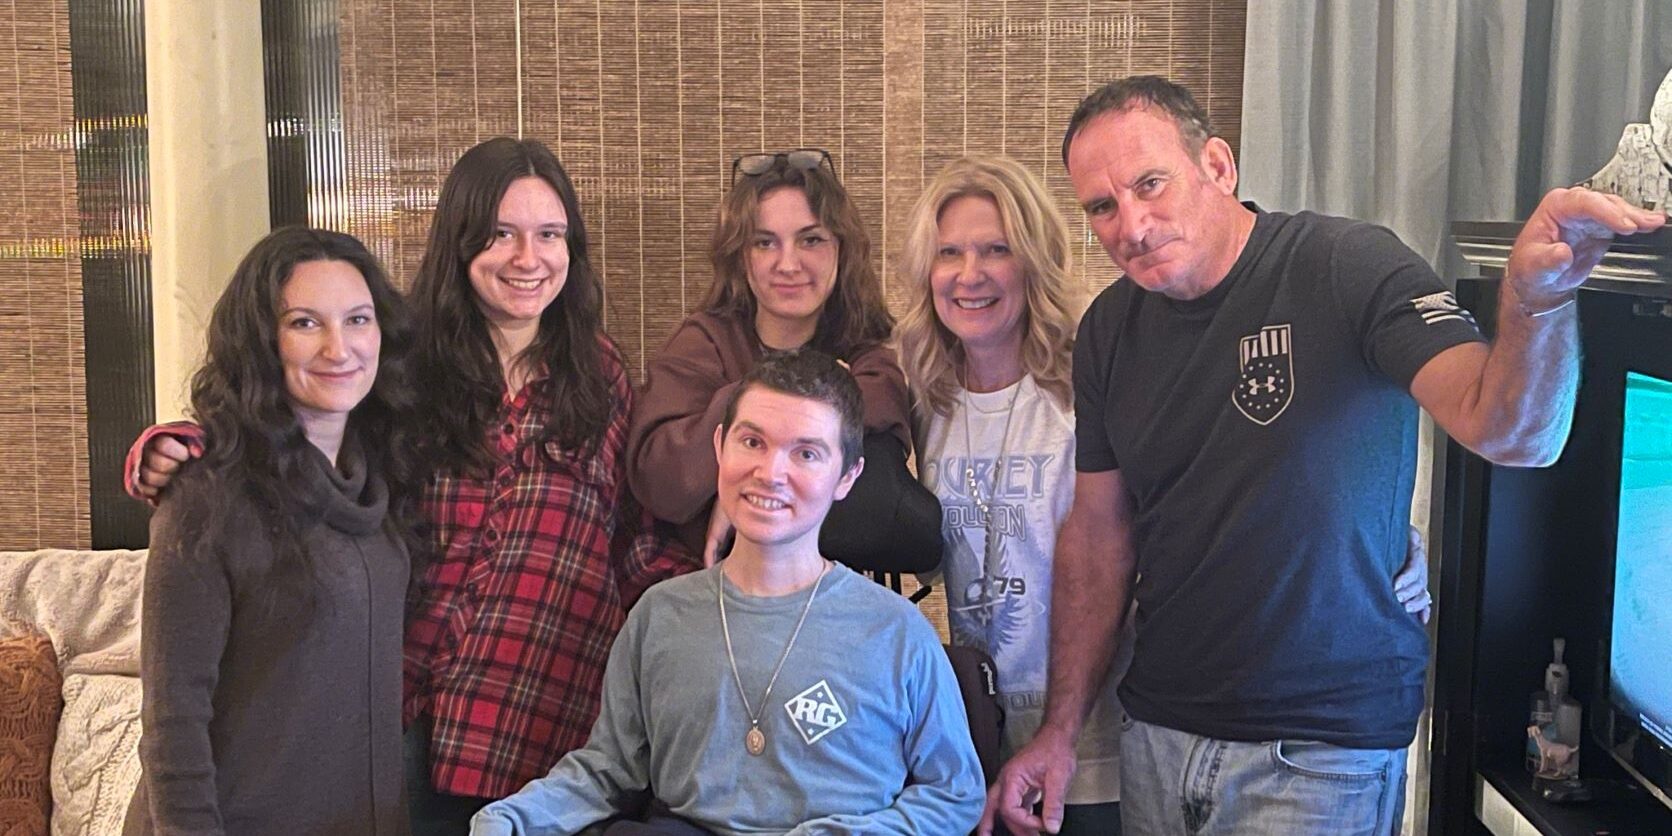 Beckley sits in his wheelchair surrounded by his three sisters, mother, and father.